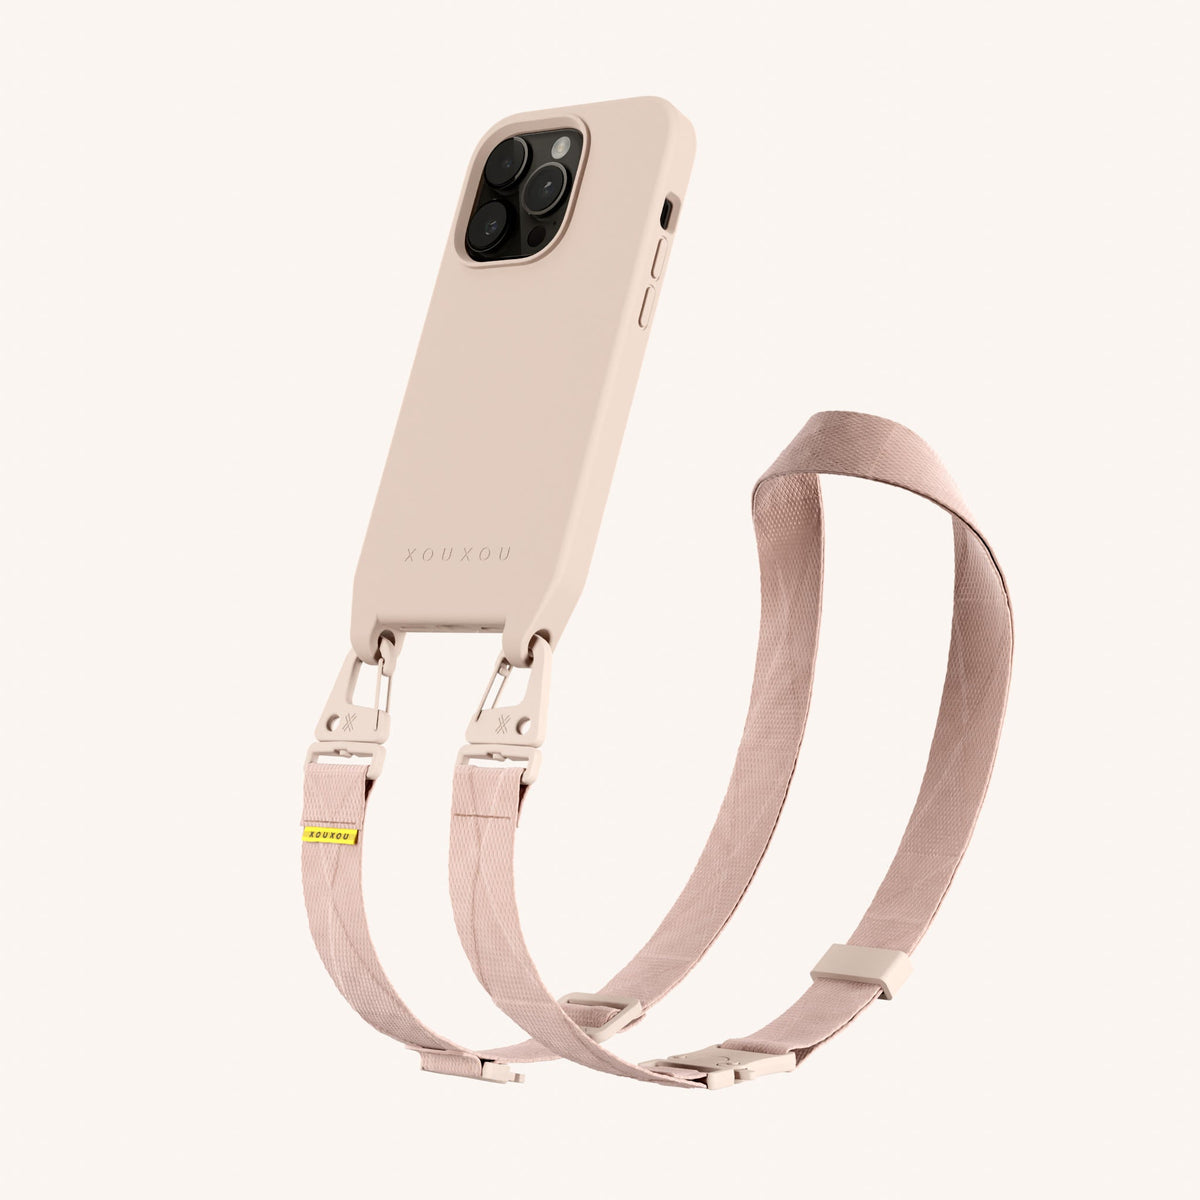 Phone Necklace with Lanyard for iPhone 14 Pro without MagSafe in Powder Pink Perspective View | XOUXOU #phone model_iphone 14 pro